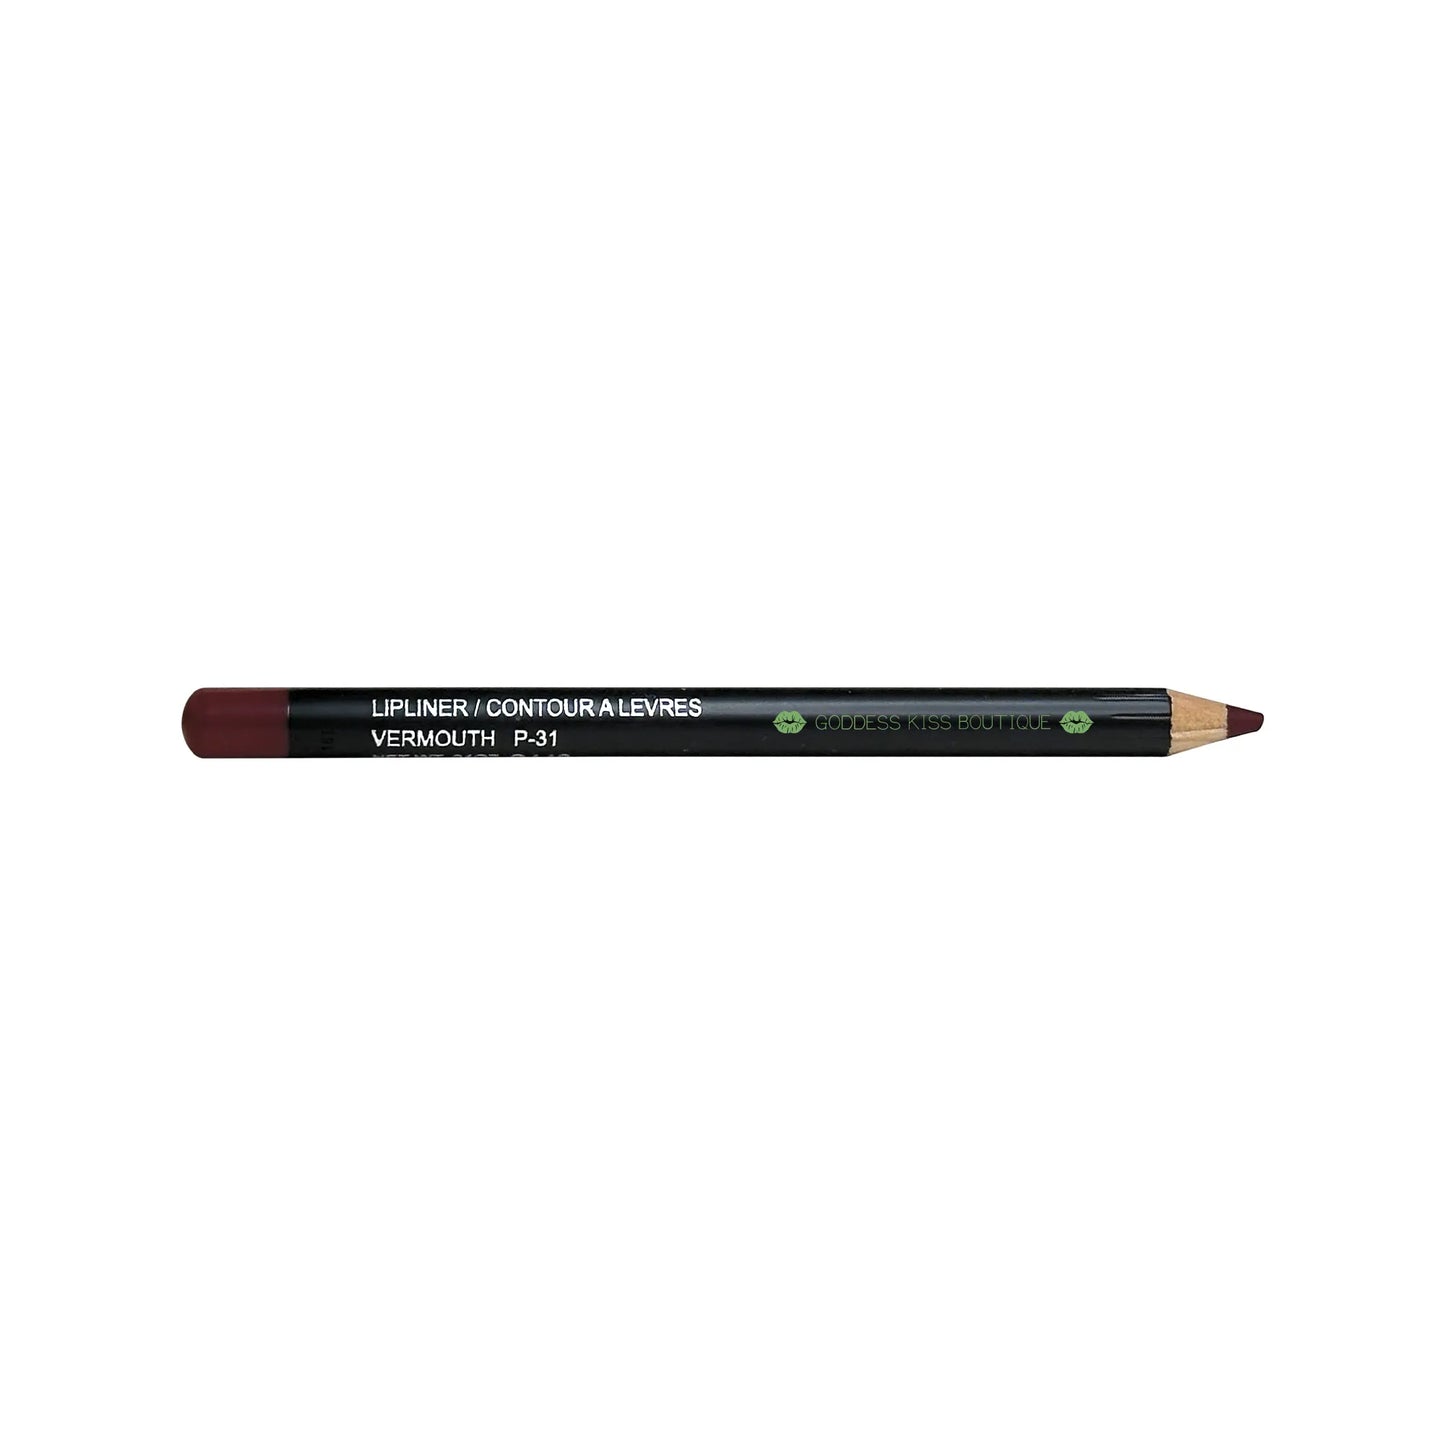 Pout Power Lip Liner - Vermouth | Long-Lasting Formula for Perfect Lip Definition